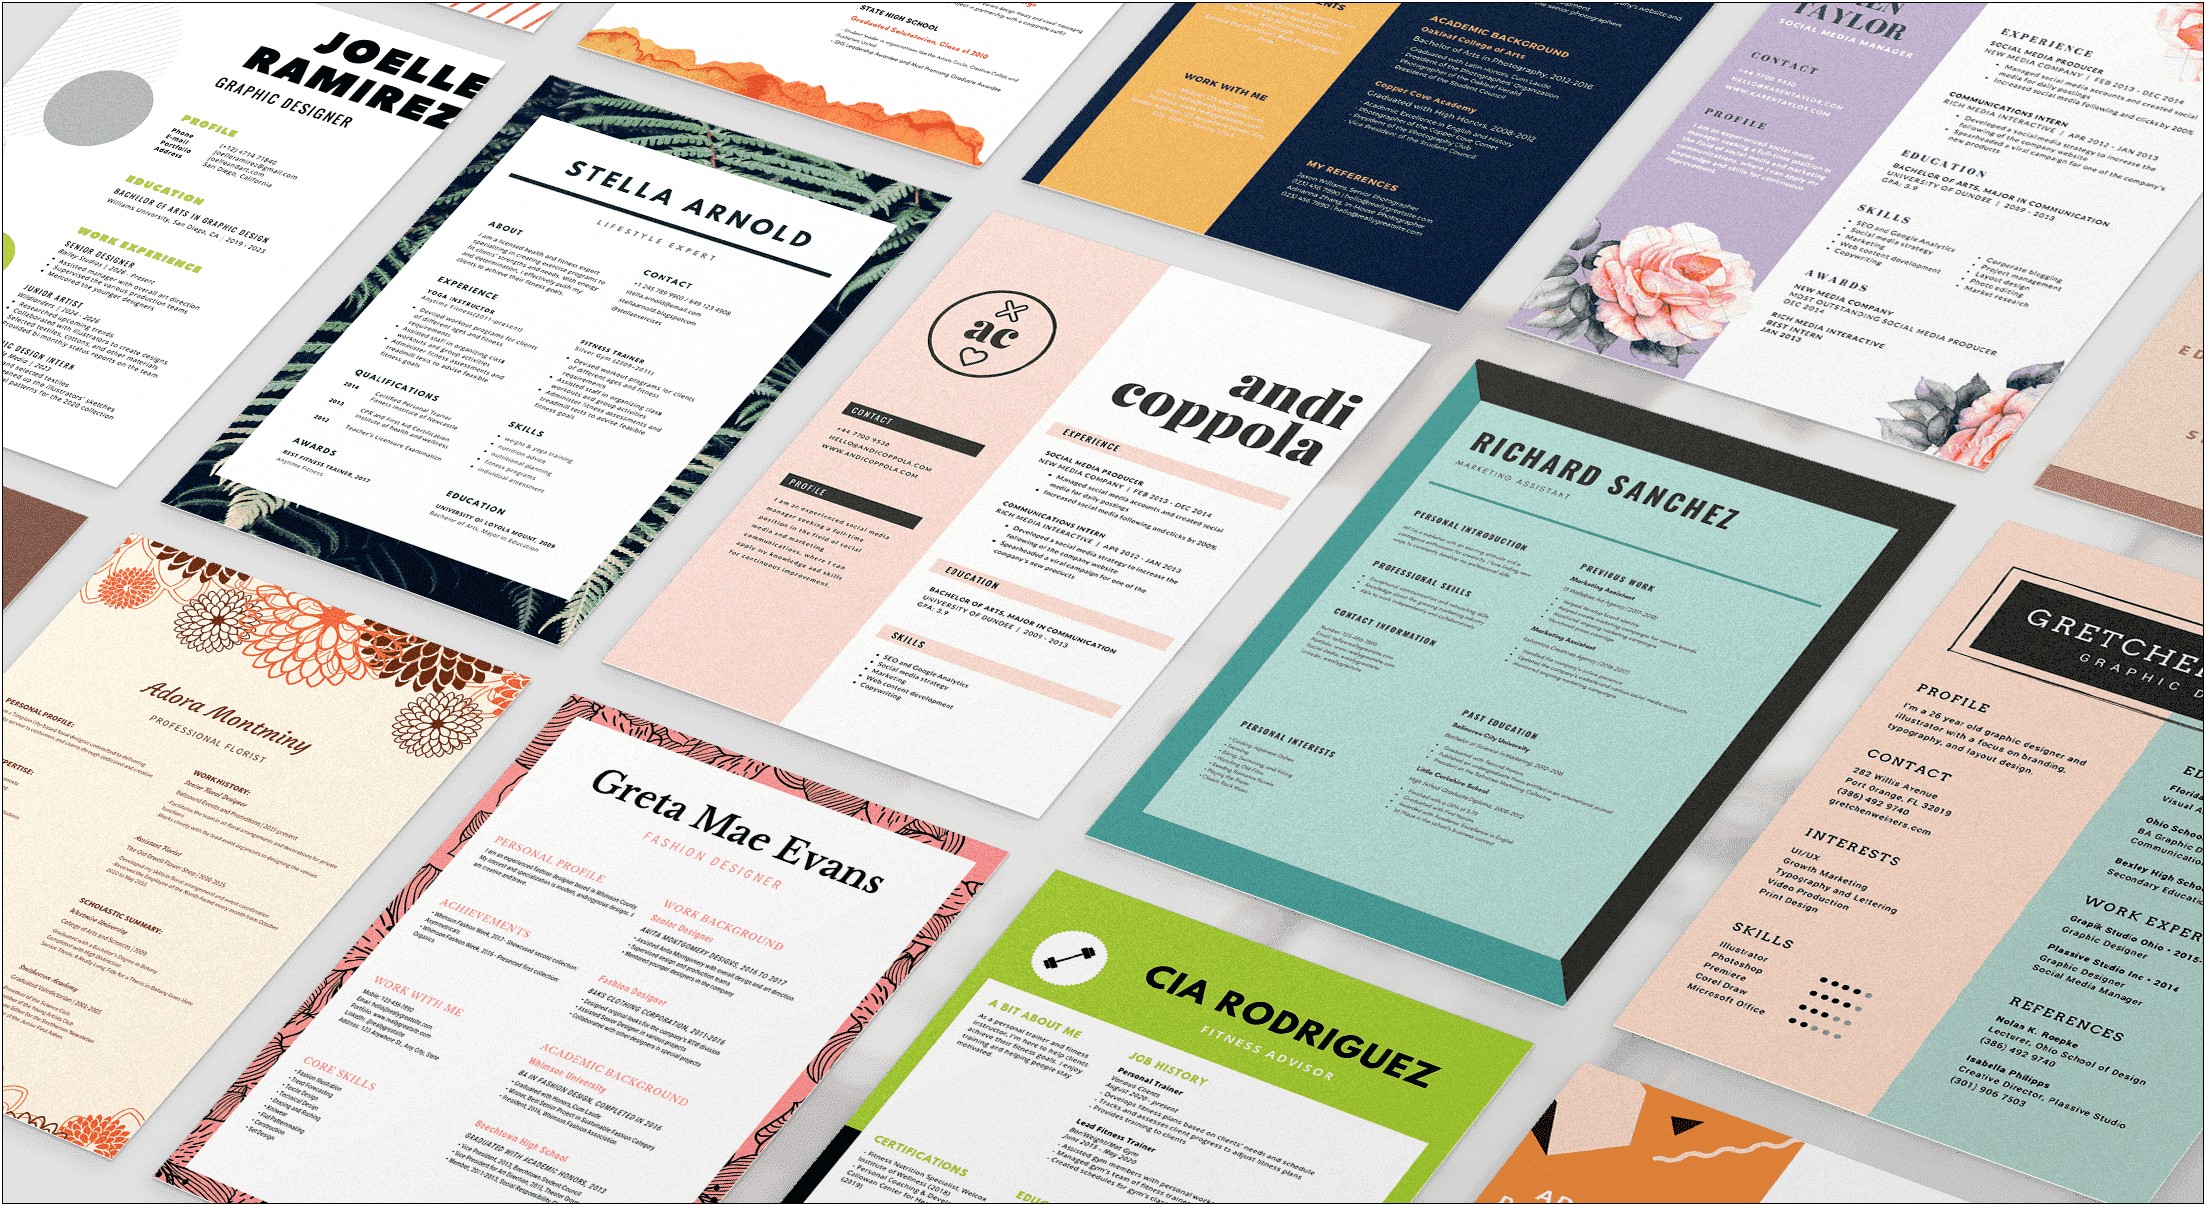 Online Resume Creator For Freshers Free